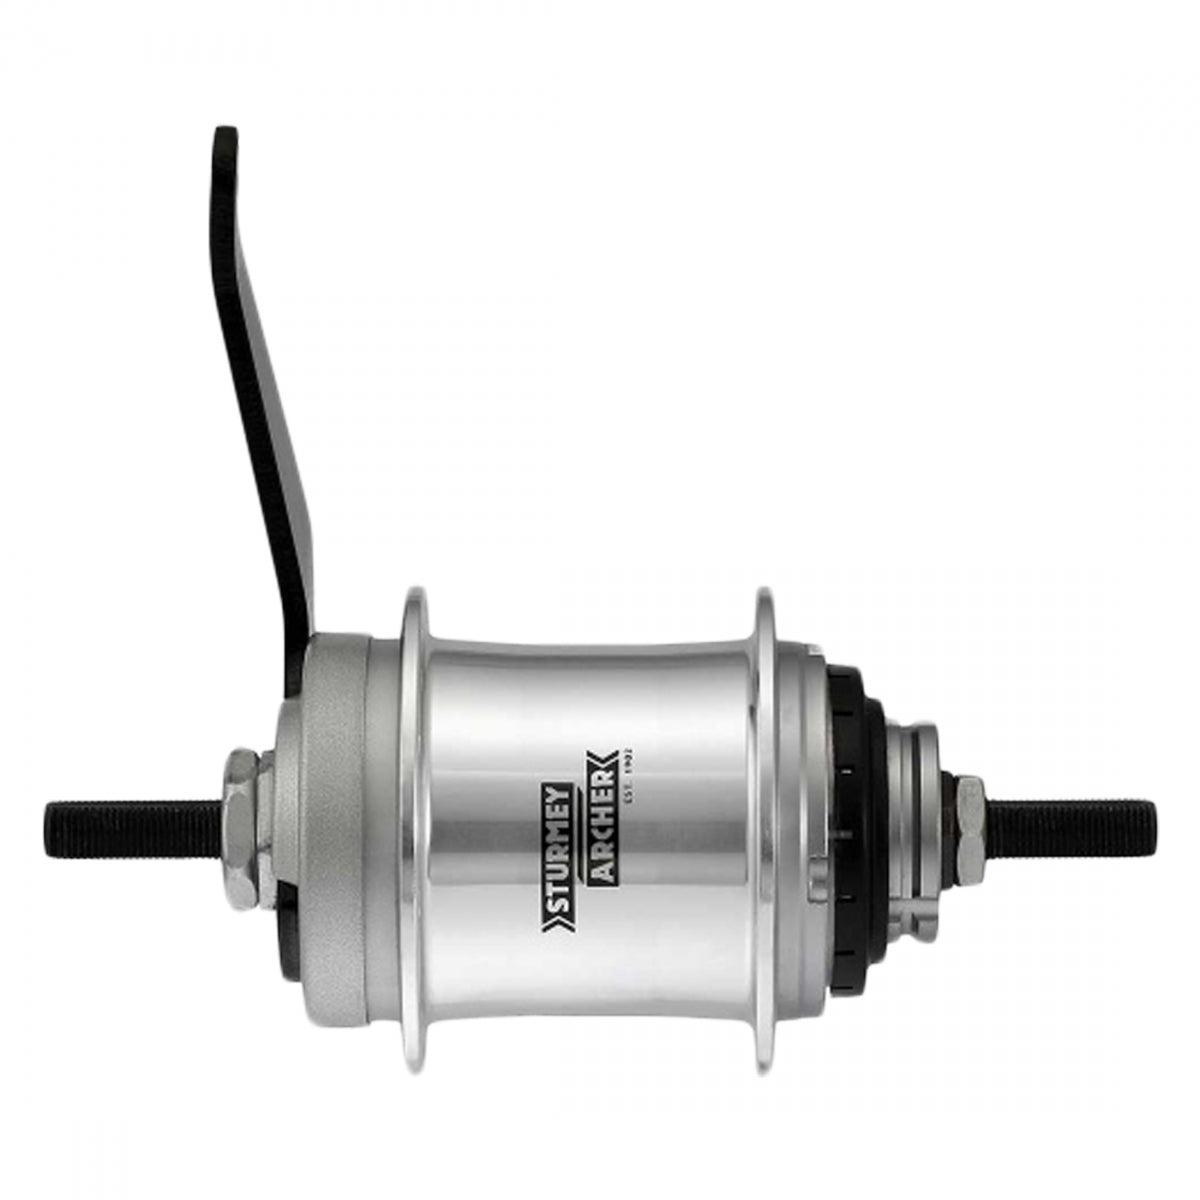 Hub Rr S/A 3Sp Src3 Cb 36 Aly Sl W/Trim Kit/Twist-Shifter Tss33/Casing 1700Mm 18T 163/116Mm Non-Rotary